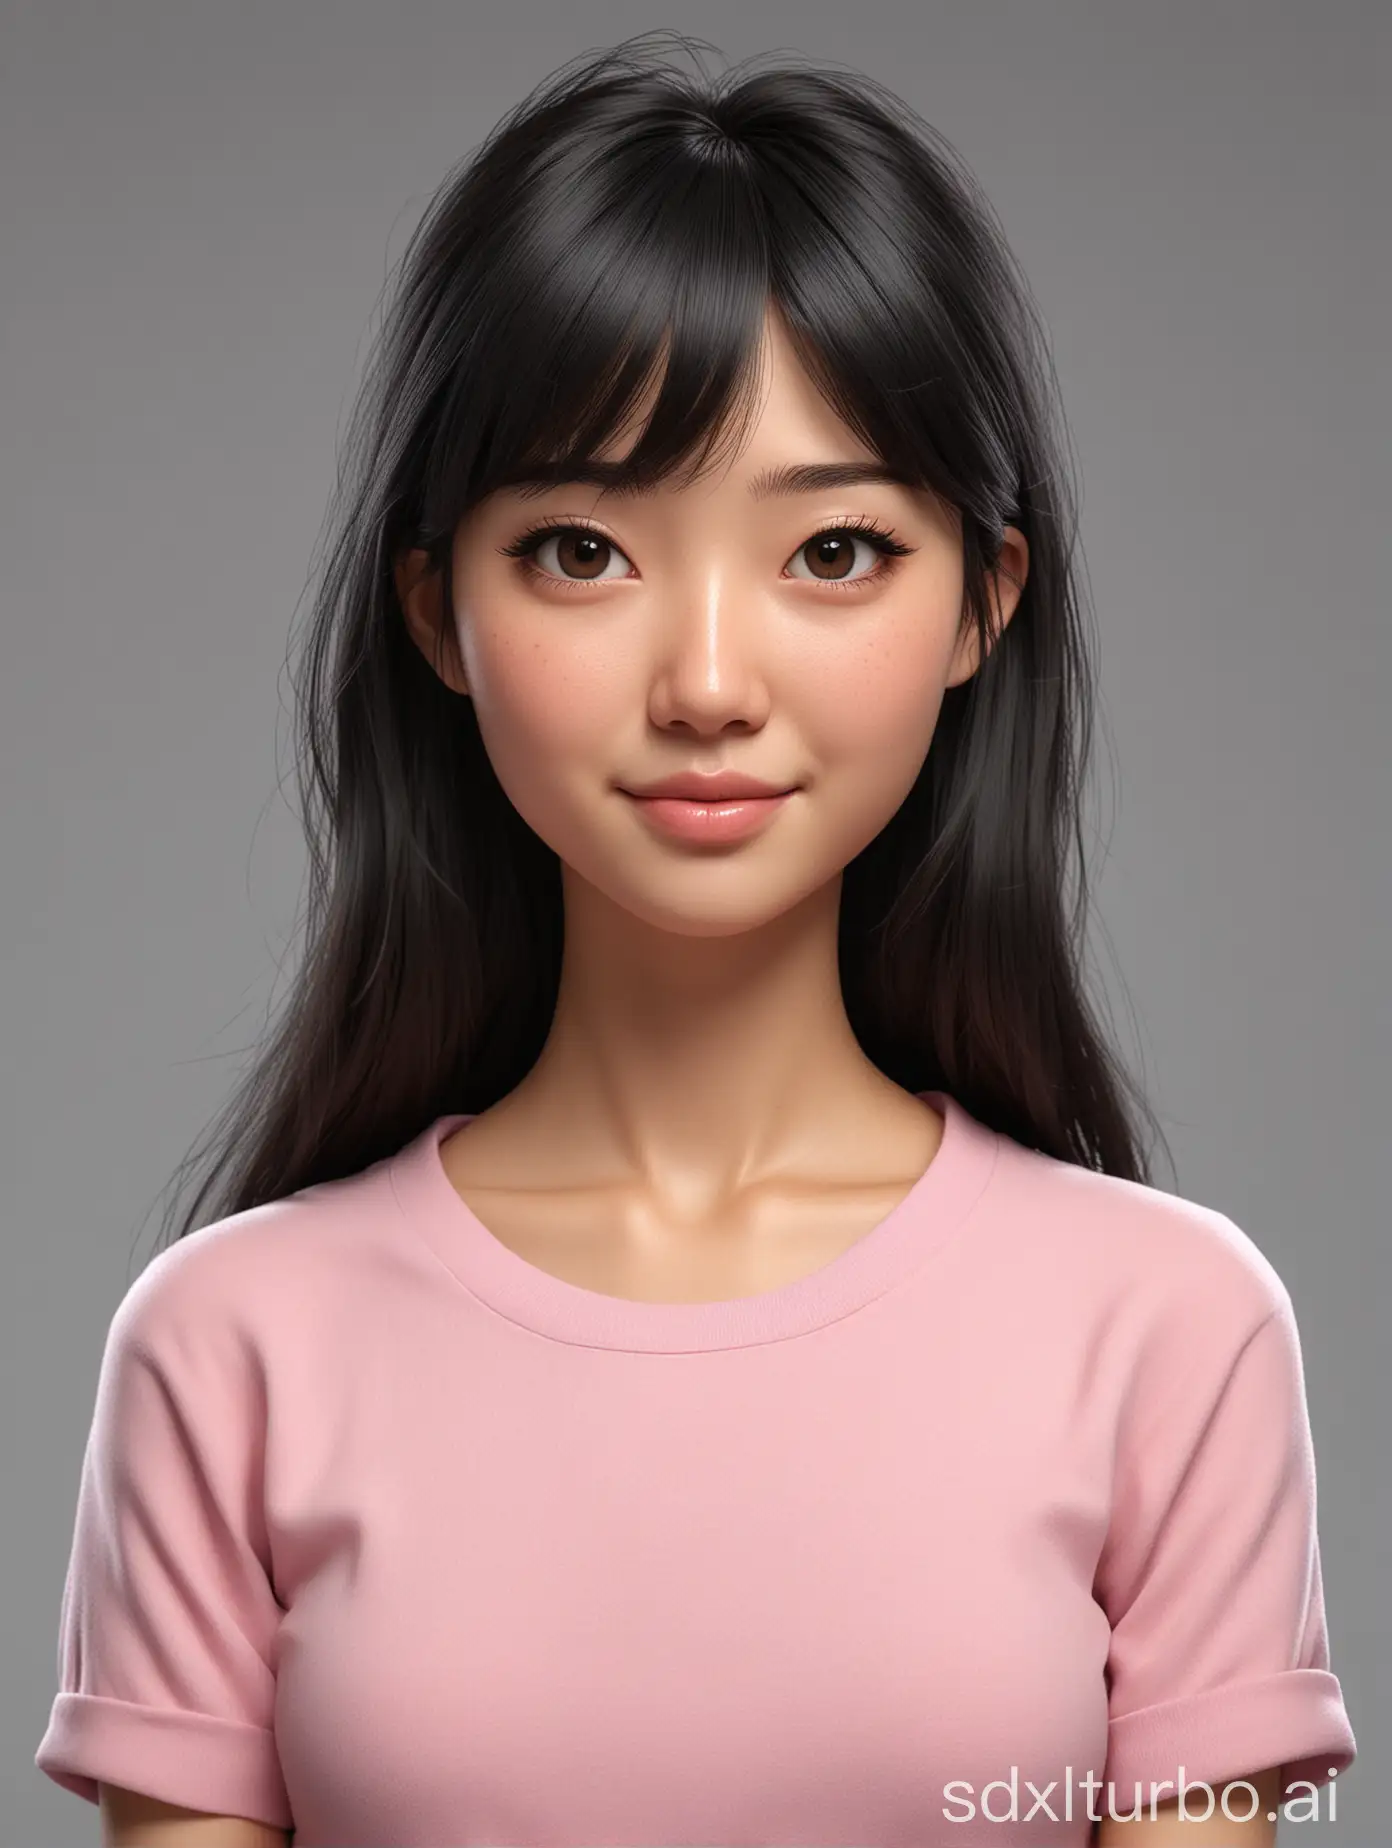 Create a full 3D cartoon style half body with a big head. A 25 year old Japanese woman. Ideal height, oval face shape. beautiful, sharp nose, clean white skin, thin sweet smile. Long black hair, slightly wavy, thin bangs with shaggy layers. Wearing a pink shirt. The body position is clearly visible, arms crossed. The background is solid white. Use soft photography lighting, hair lighting, top lighting, side lighting. Medium shot, highest quality photo, Uhd, 16k